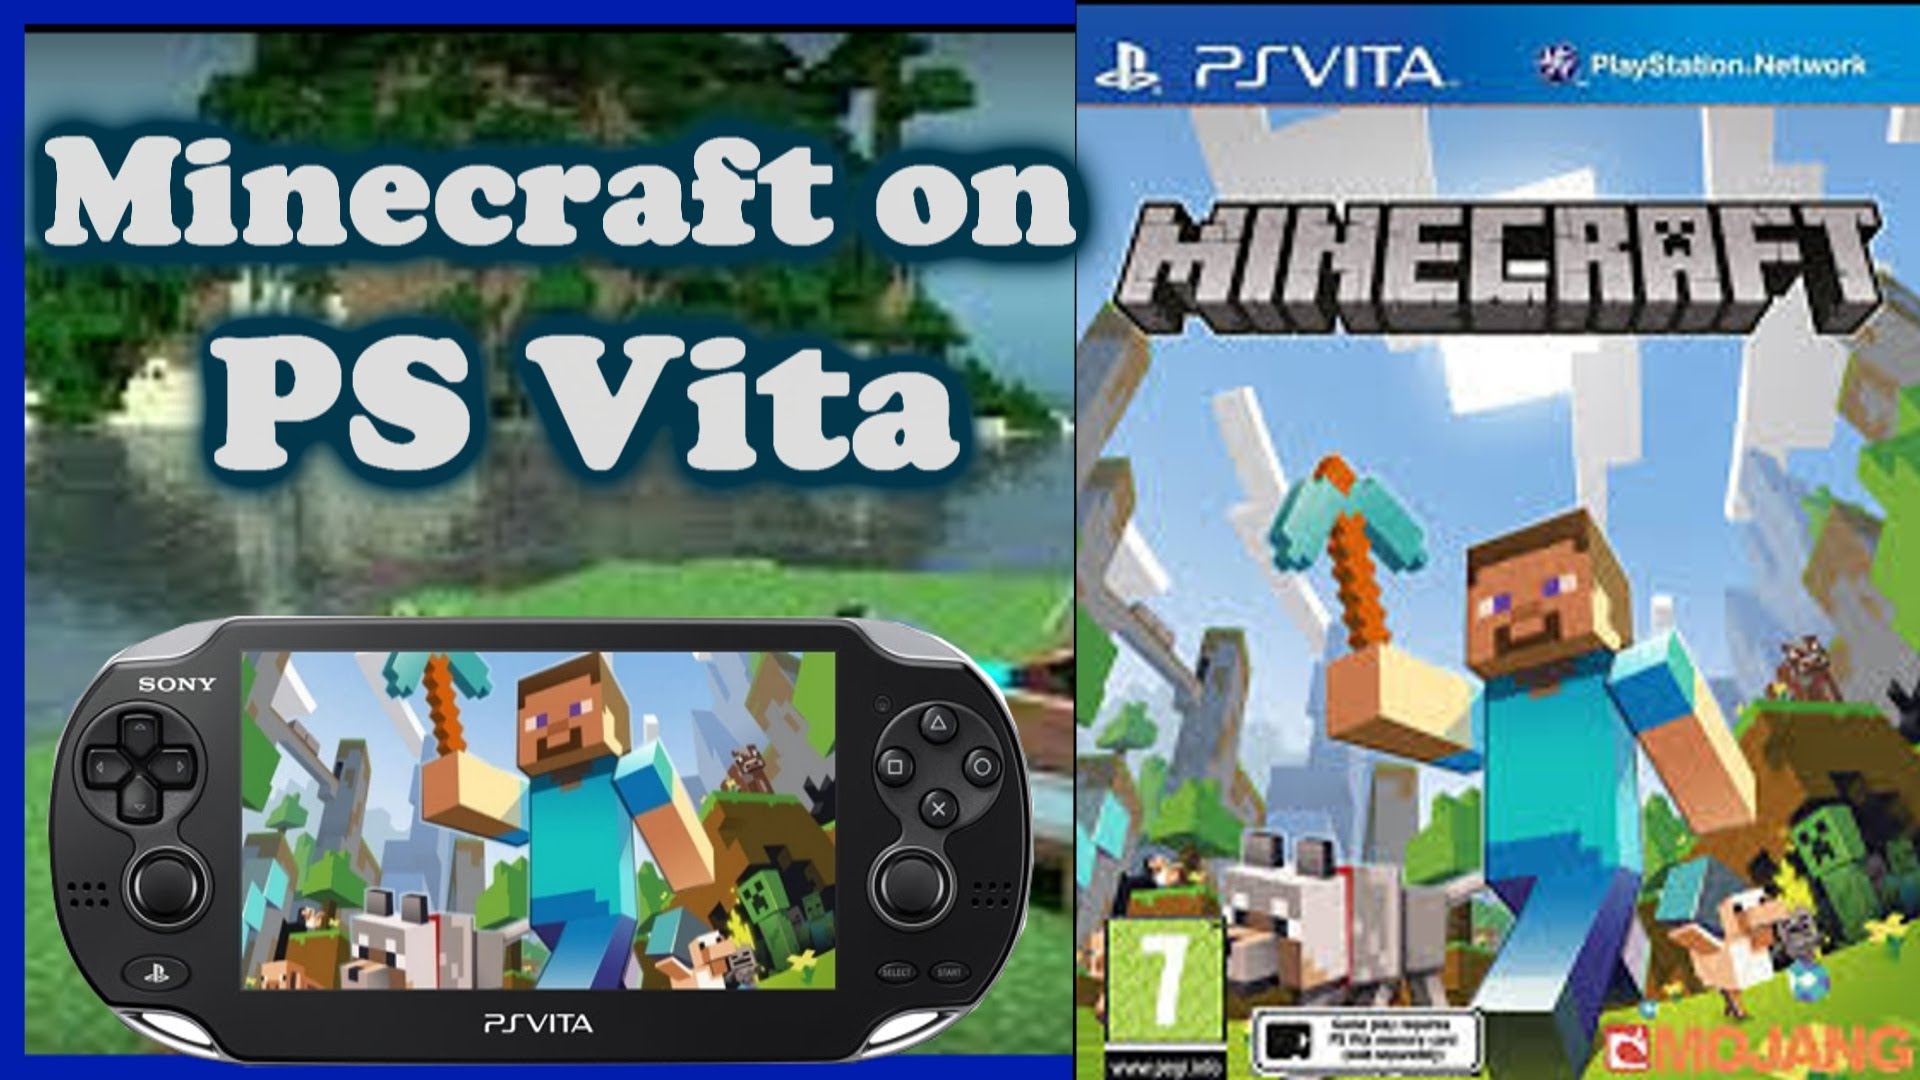 Minecraft Videos Show The Game Looking Great On The Playstation Vita